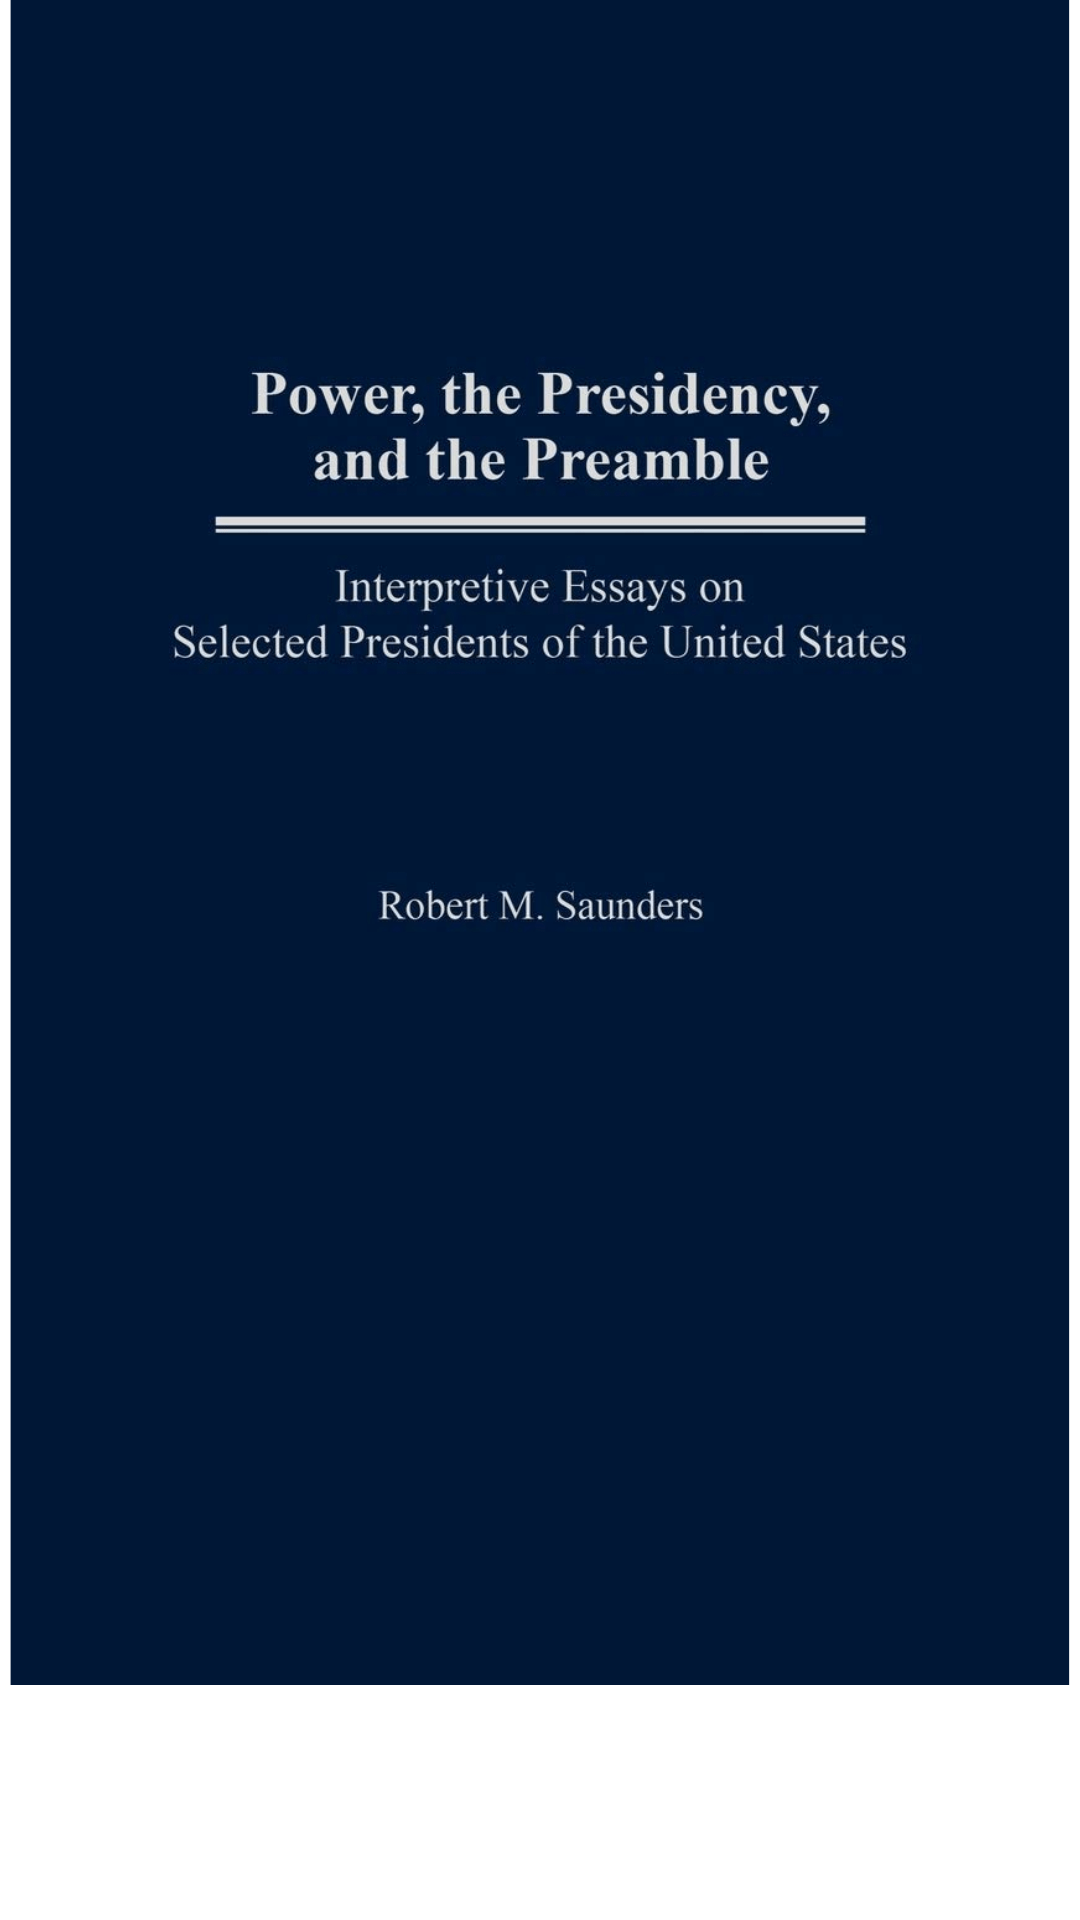 Power, the Presidency, and the Preamble : Interpretive Essays on Selected Presidents of the United States